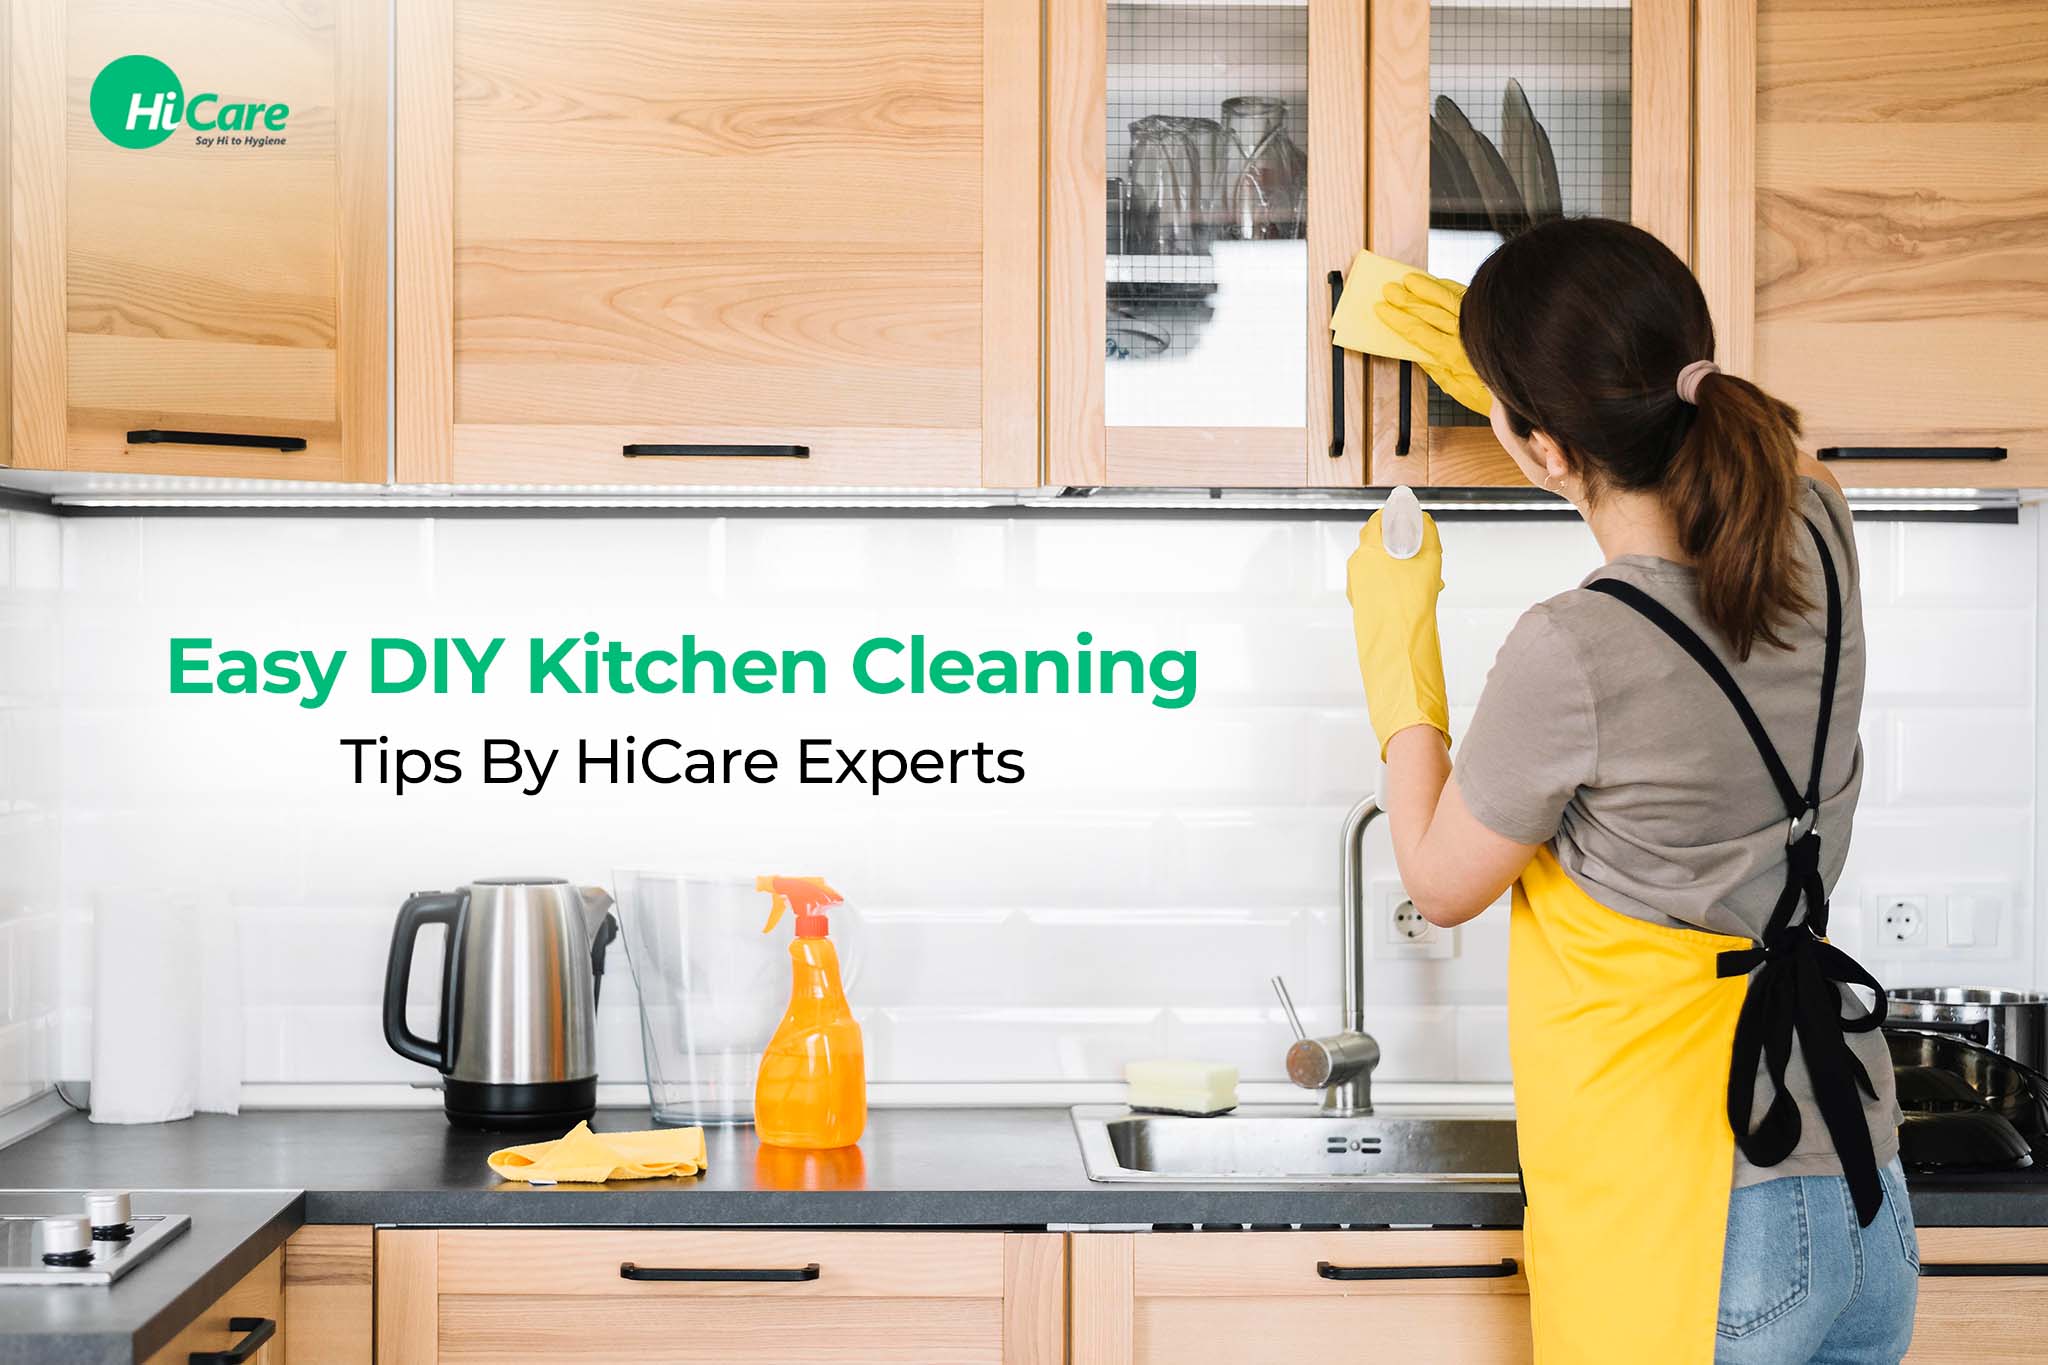 diy kitchen cleaning tips by hicare experts